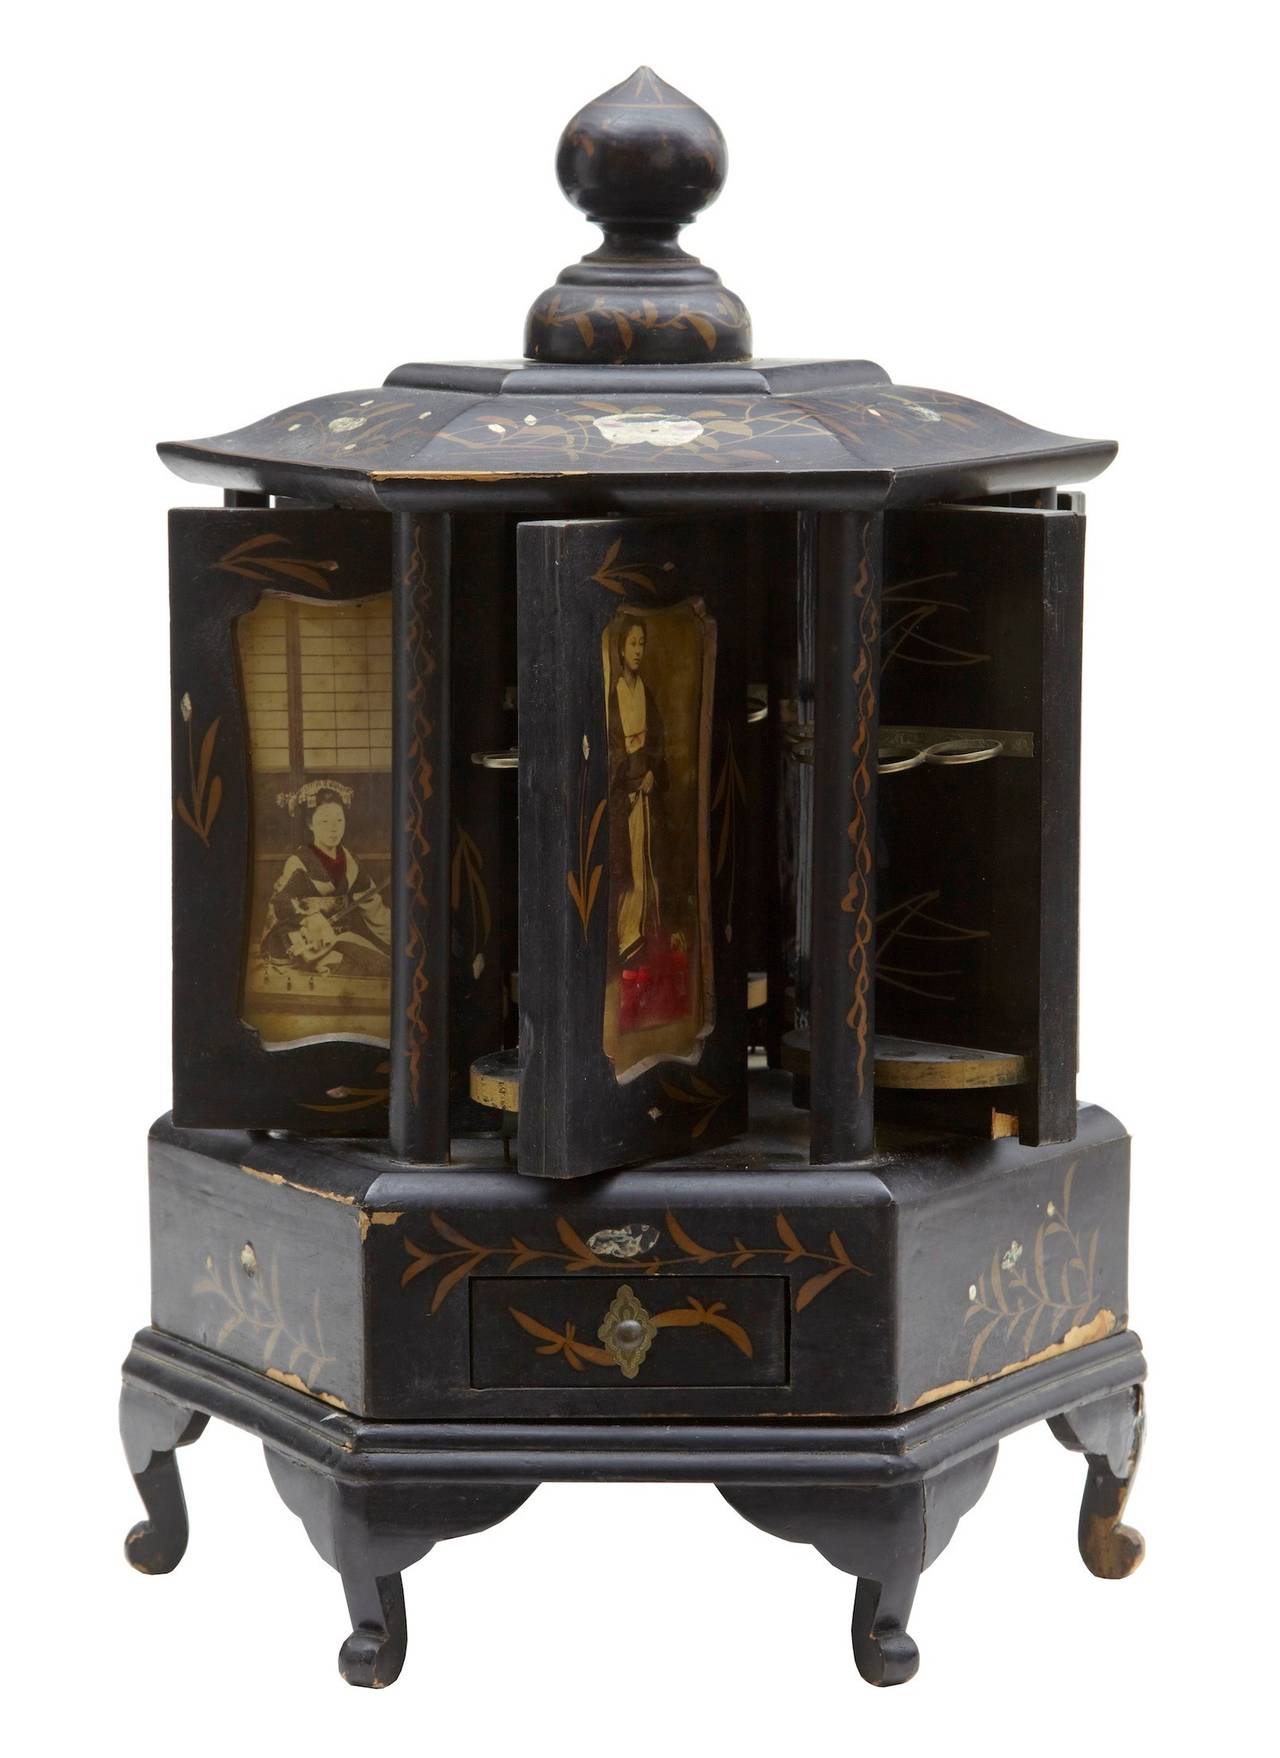 19th century Japanese black lacquer decorative cigar box

Unusual black lacquer cigar box circa 1890.

Made for the western market, this pagoda shaped cigar cabinet rotates to reveal cigar storage space.

Features photographs of Japanese